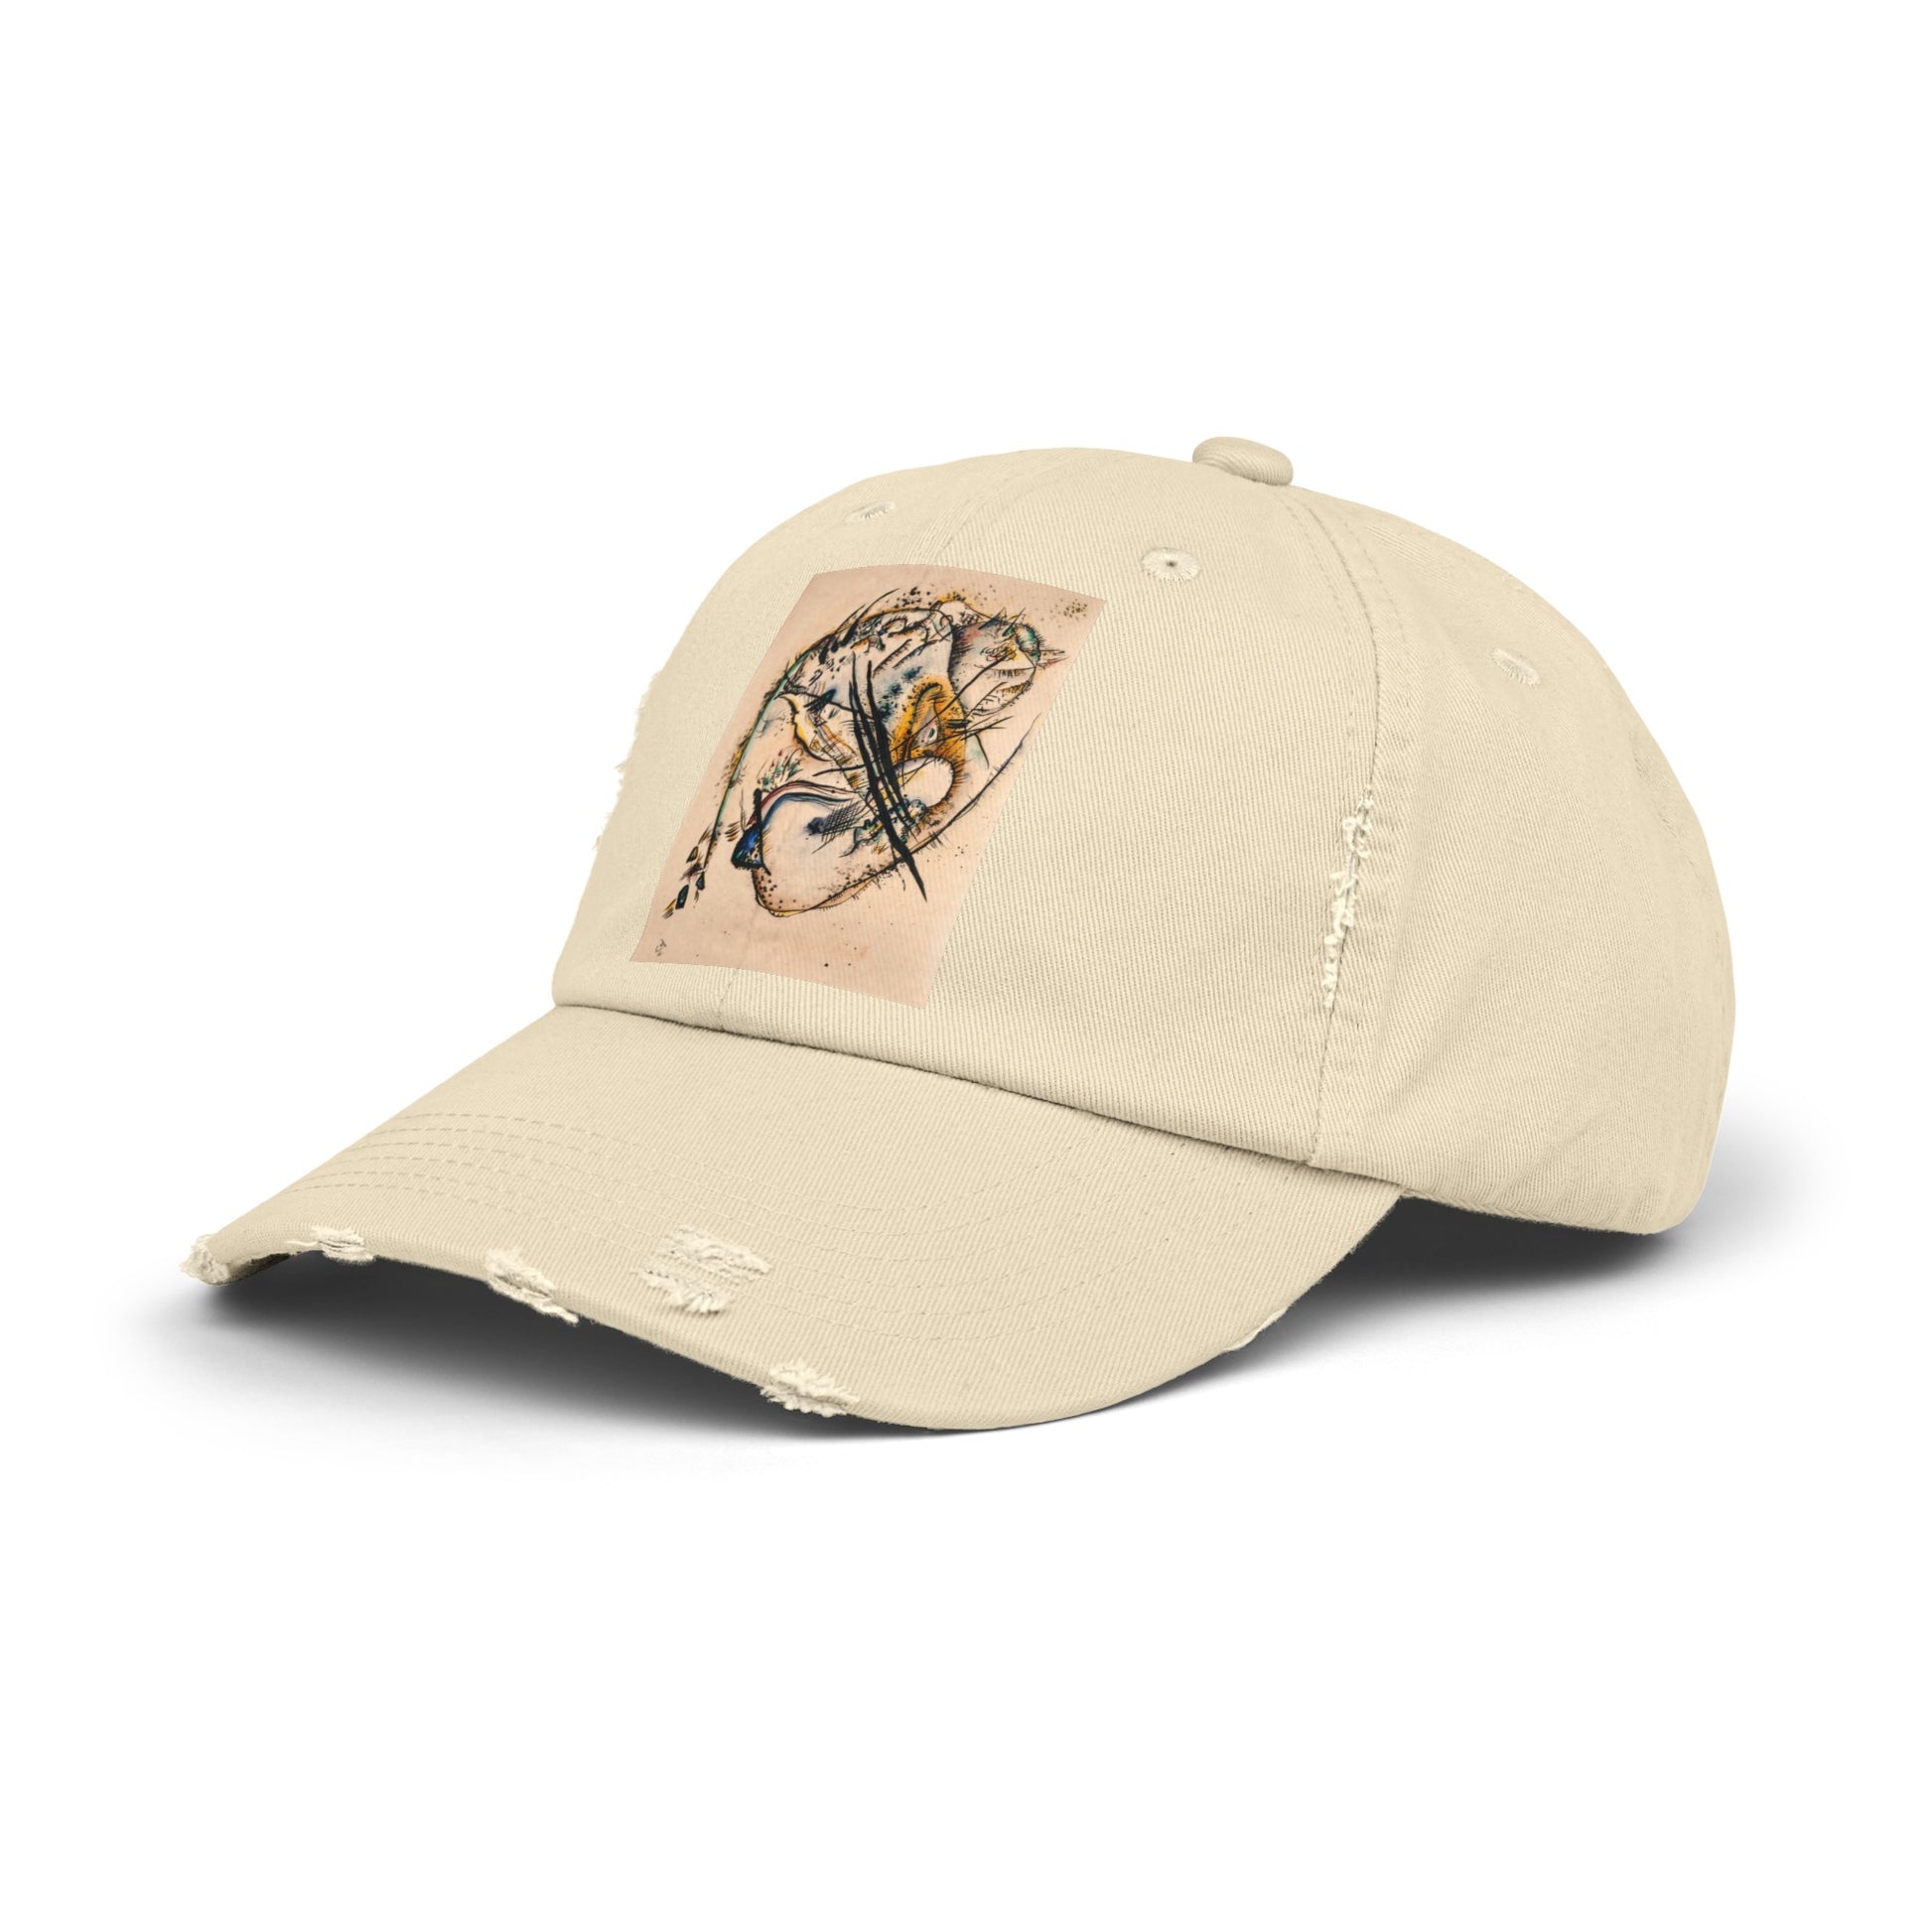 a baseball cap with a picture of a bird on it